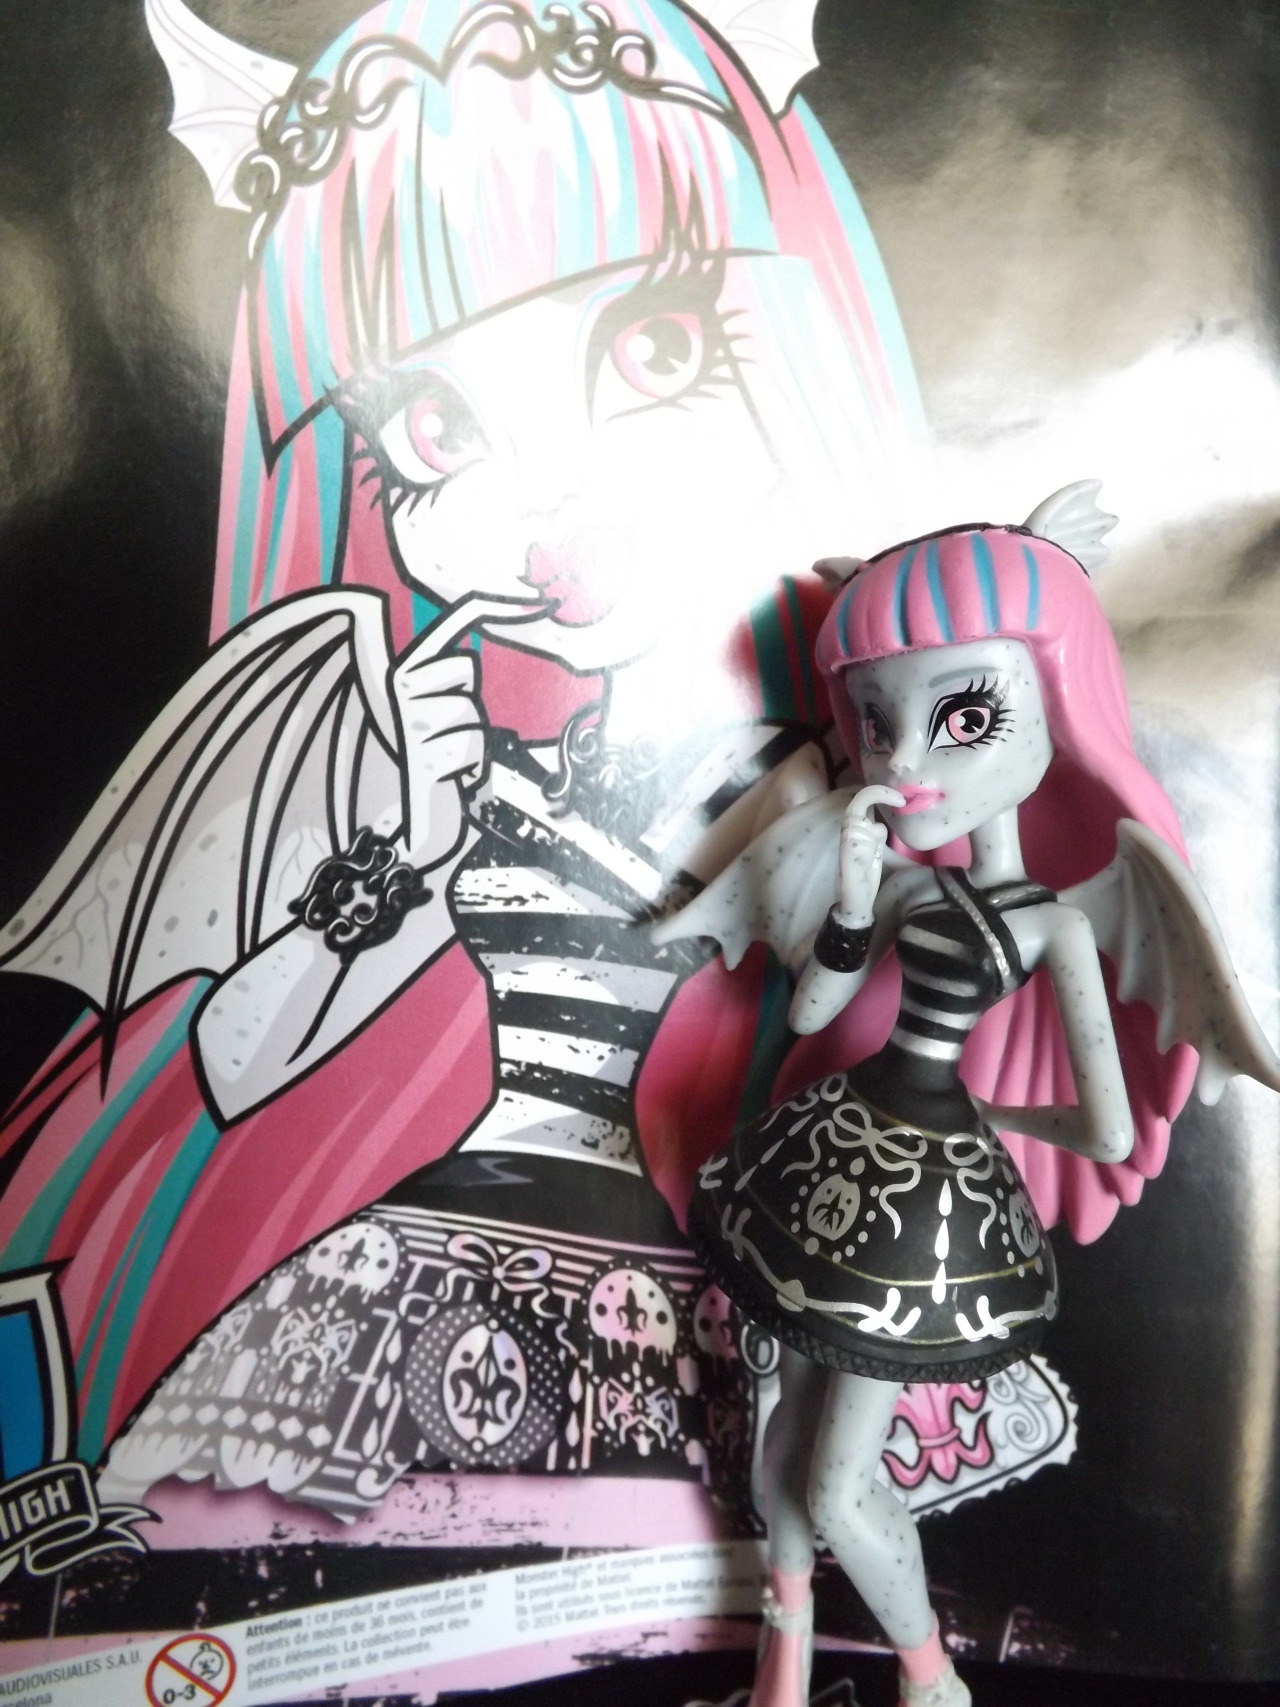 ransurround:

Monster High Figurine Collection - first 11 figurines